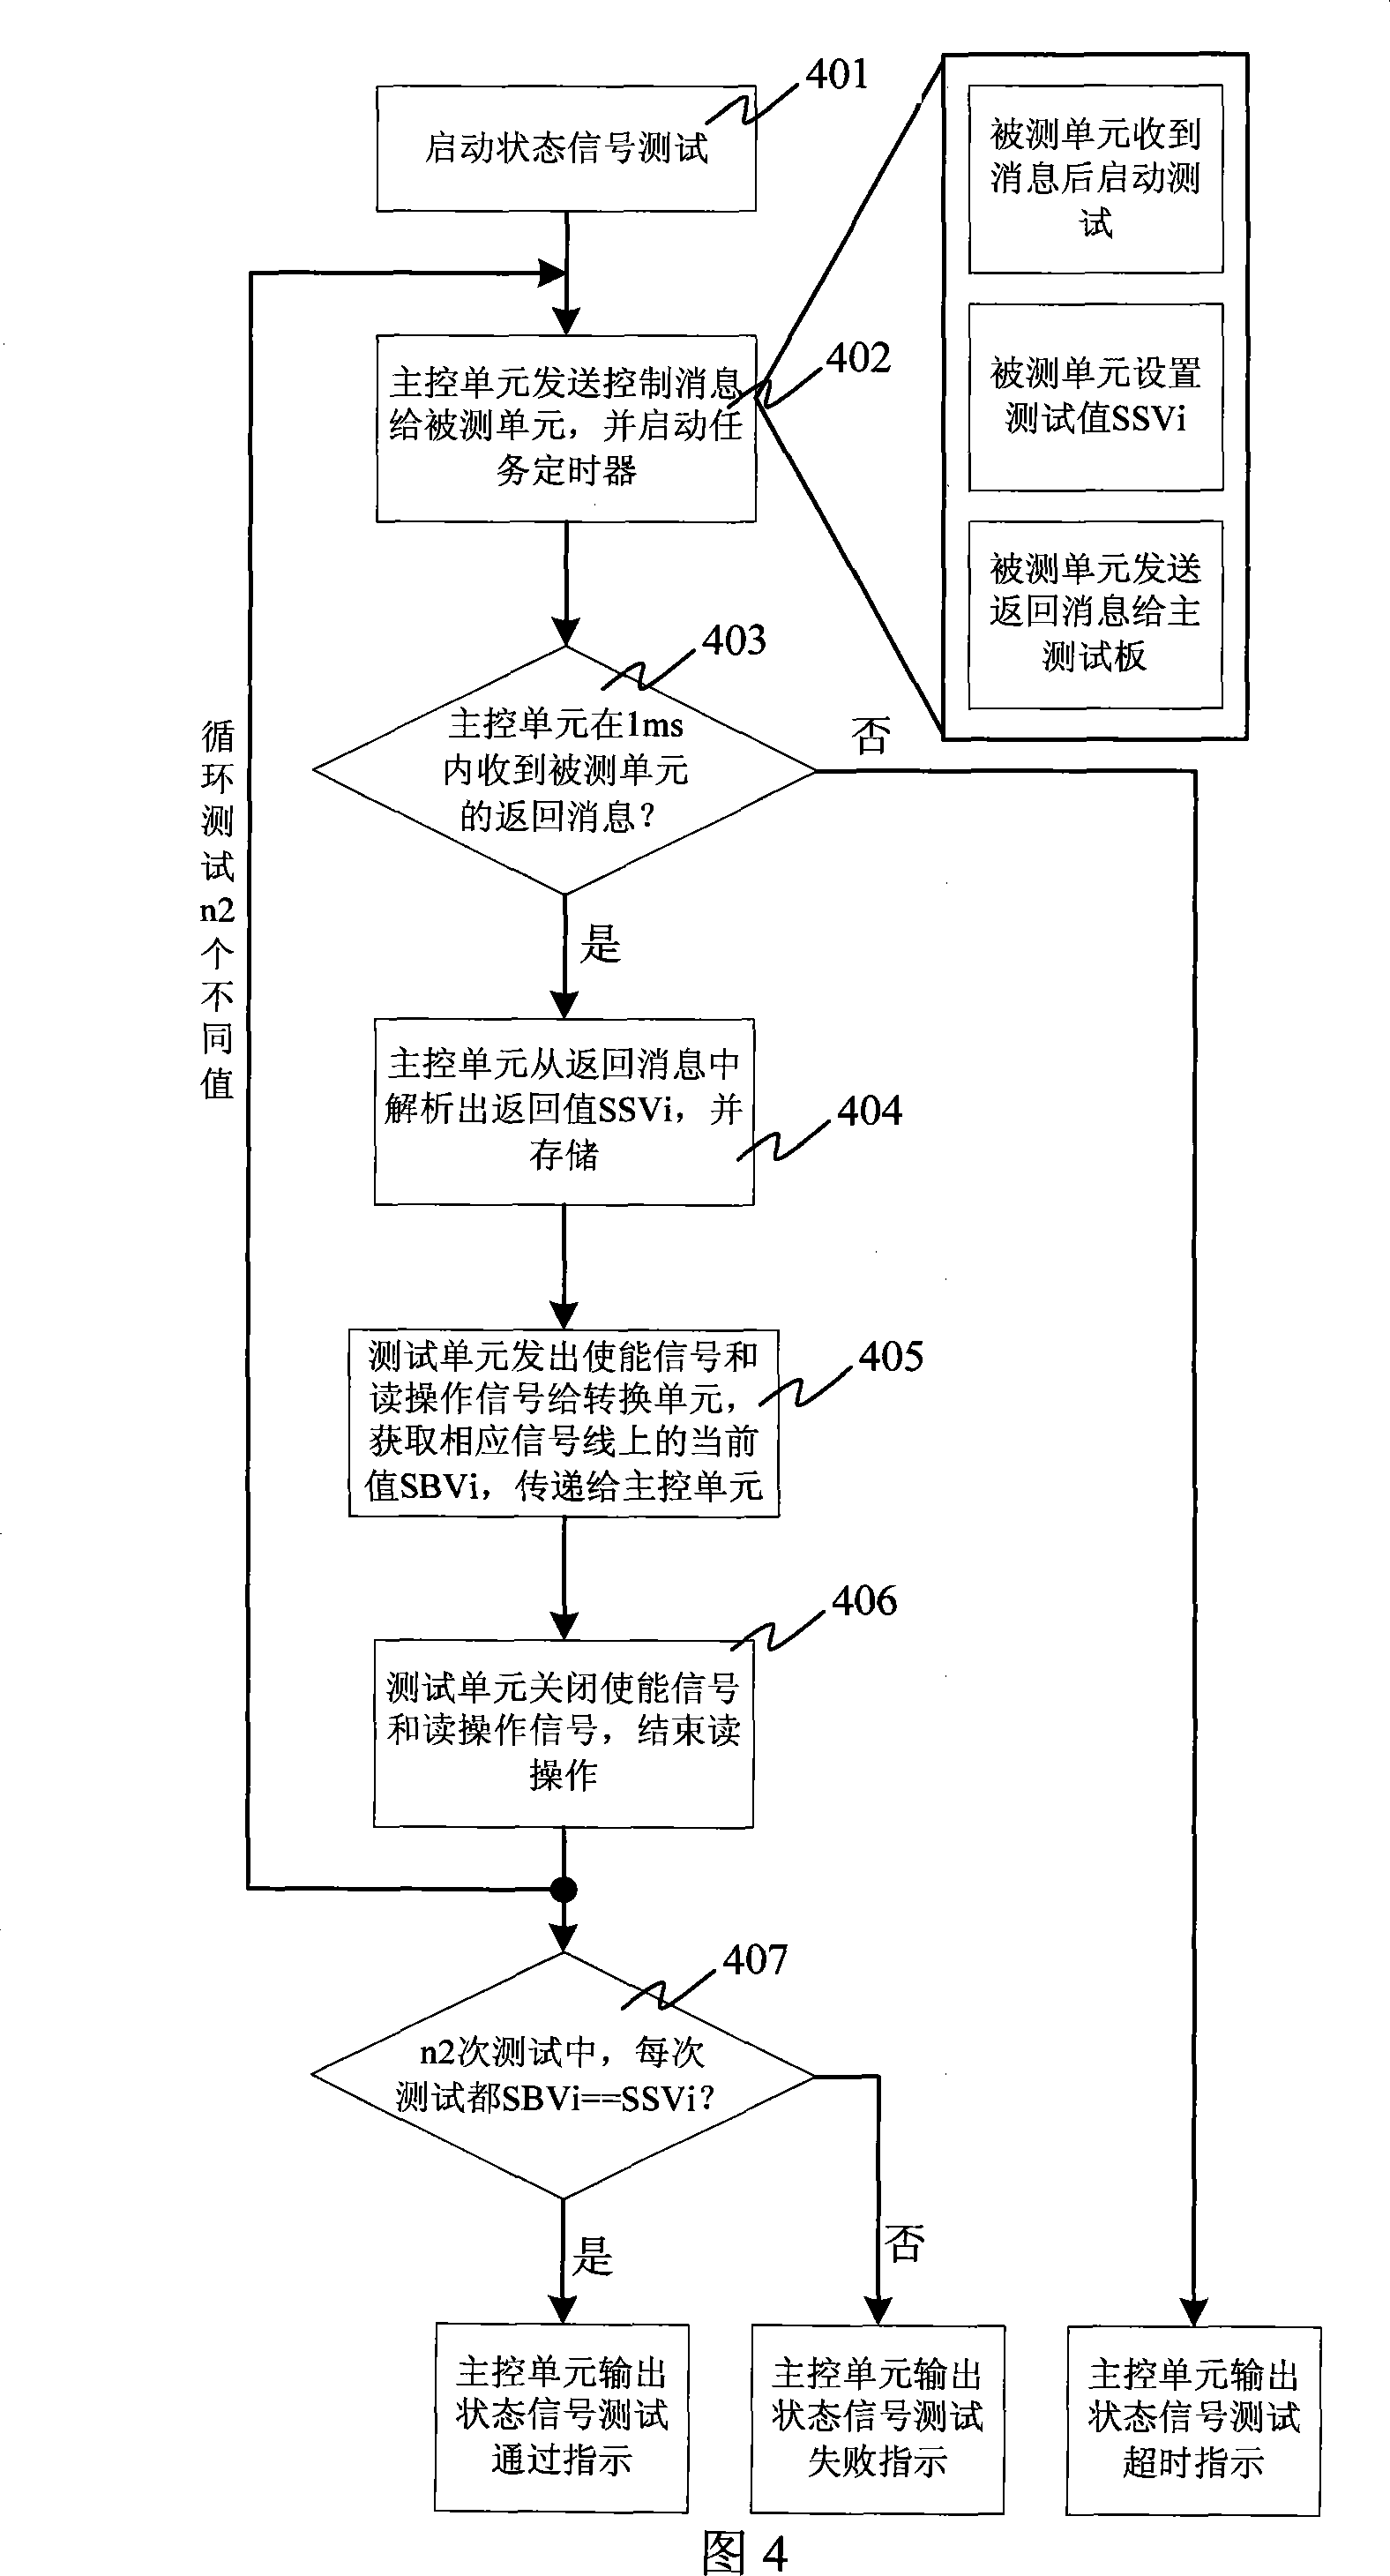 State control signal testing device